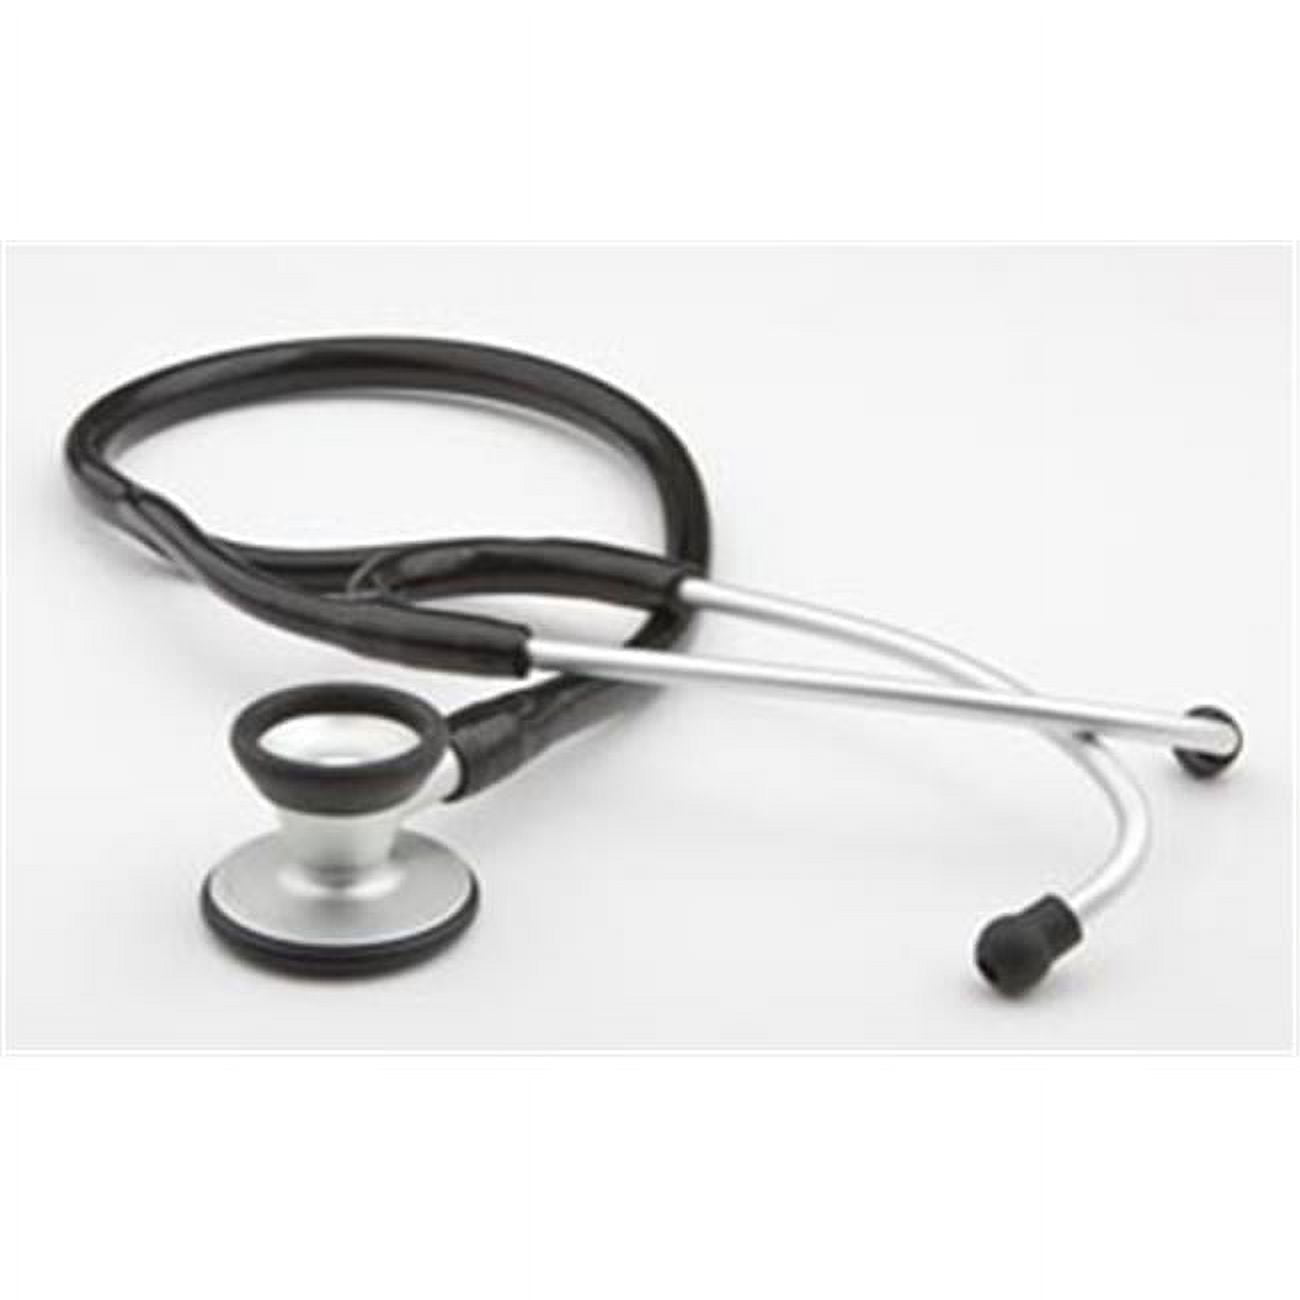 ADC 603 Clinician Stethoscope, Navy, 603N 